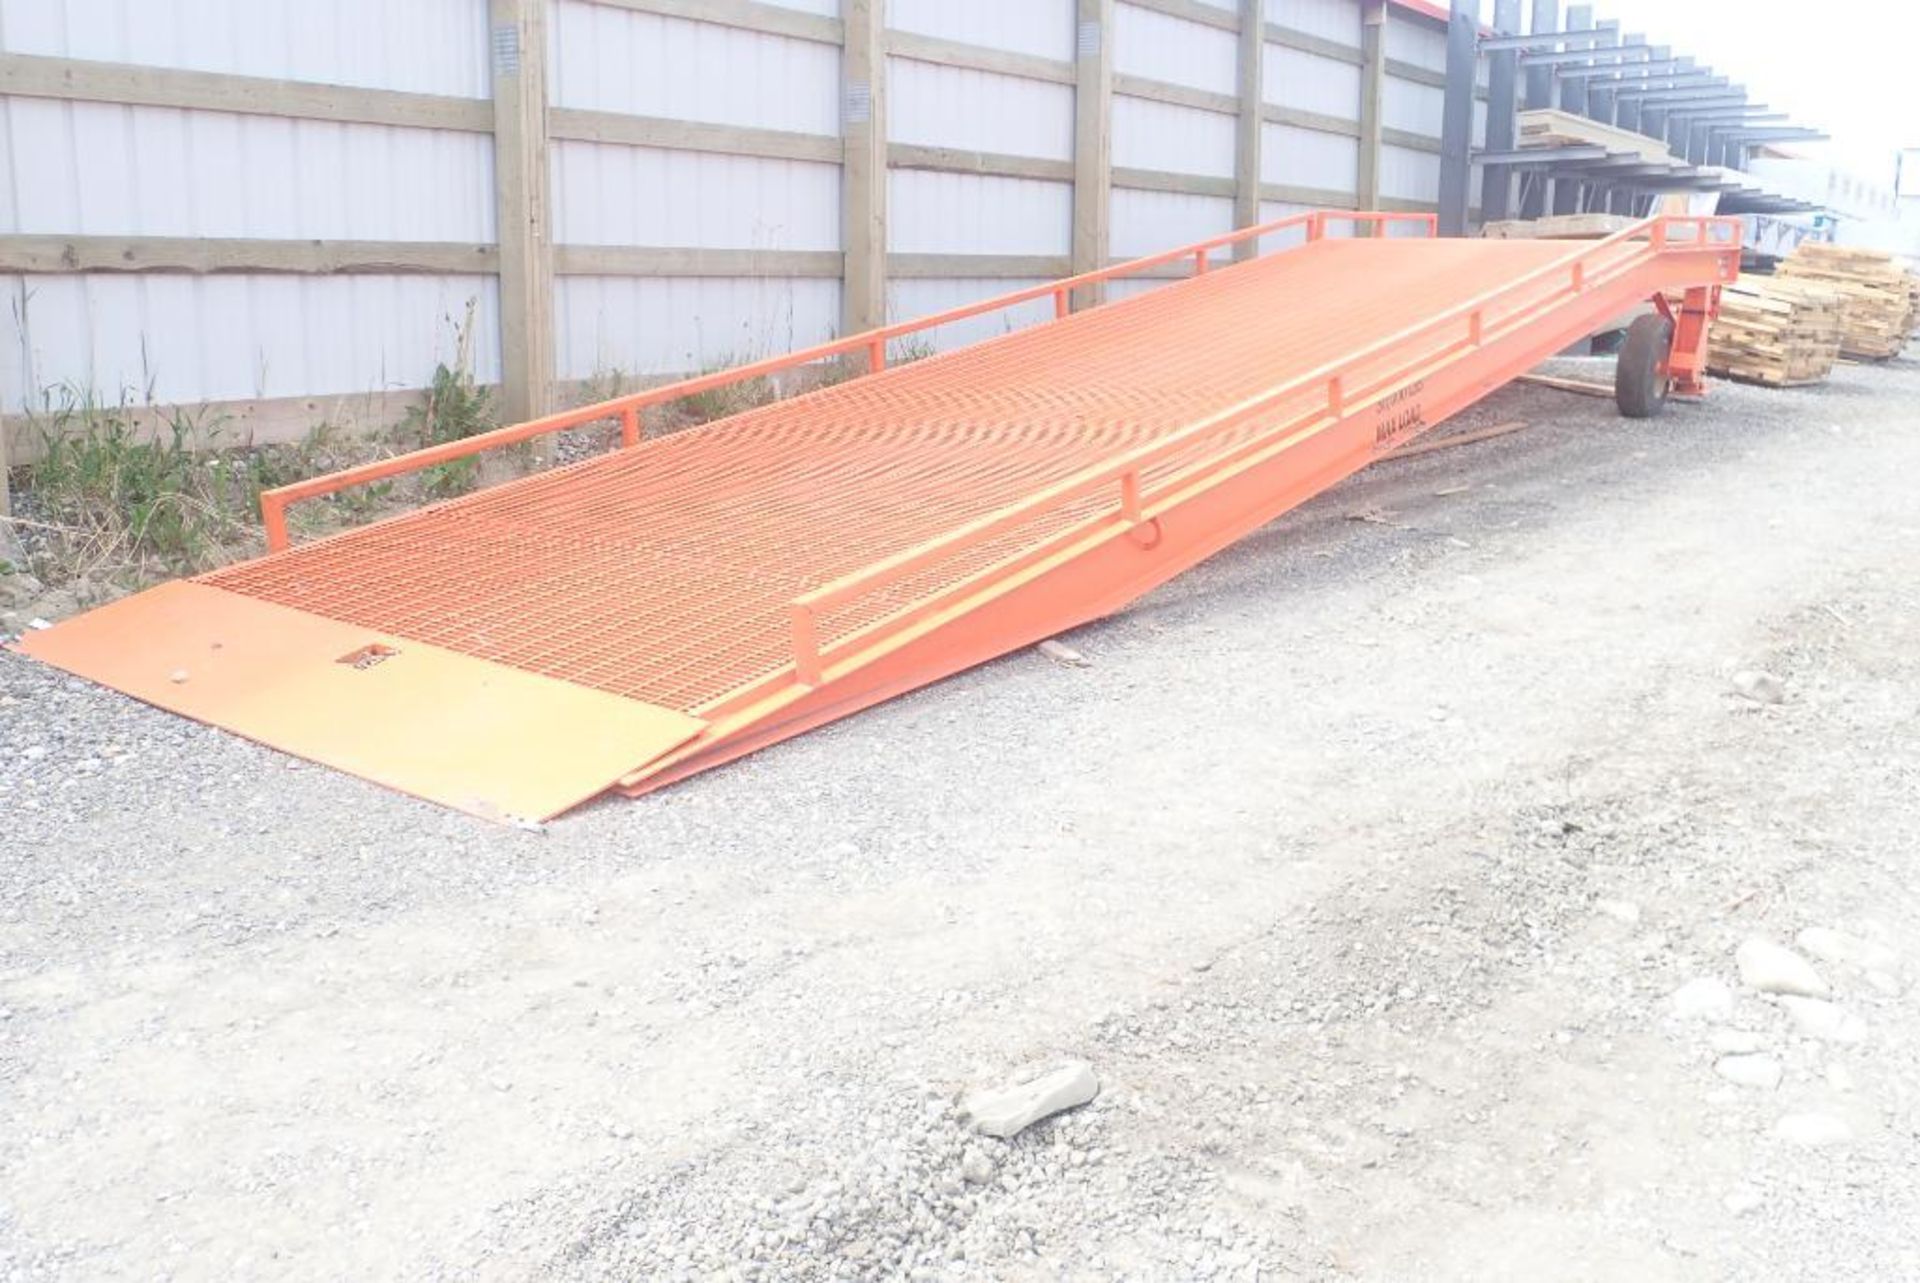 Dura-Ramp DR-M38-30K 30,000lbs Capacity Ramp w/ 30' Ramp and 8' Level Off. - Image 2 of 5